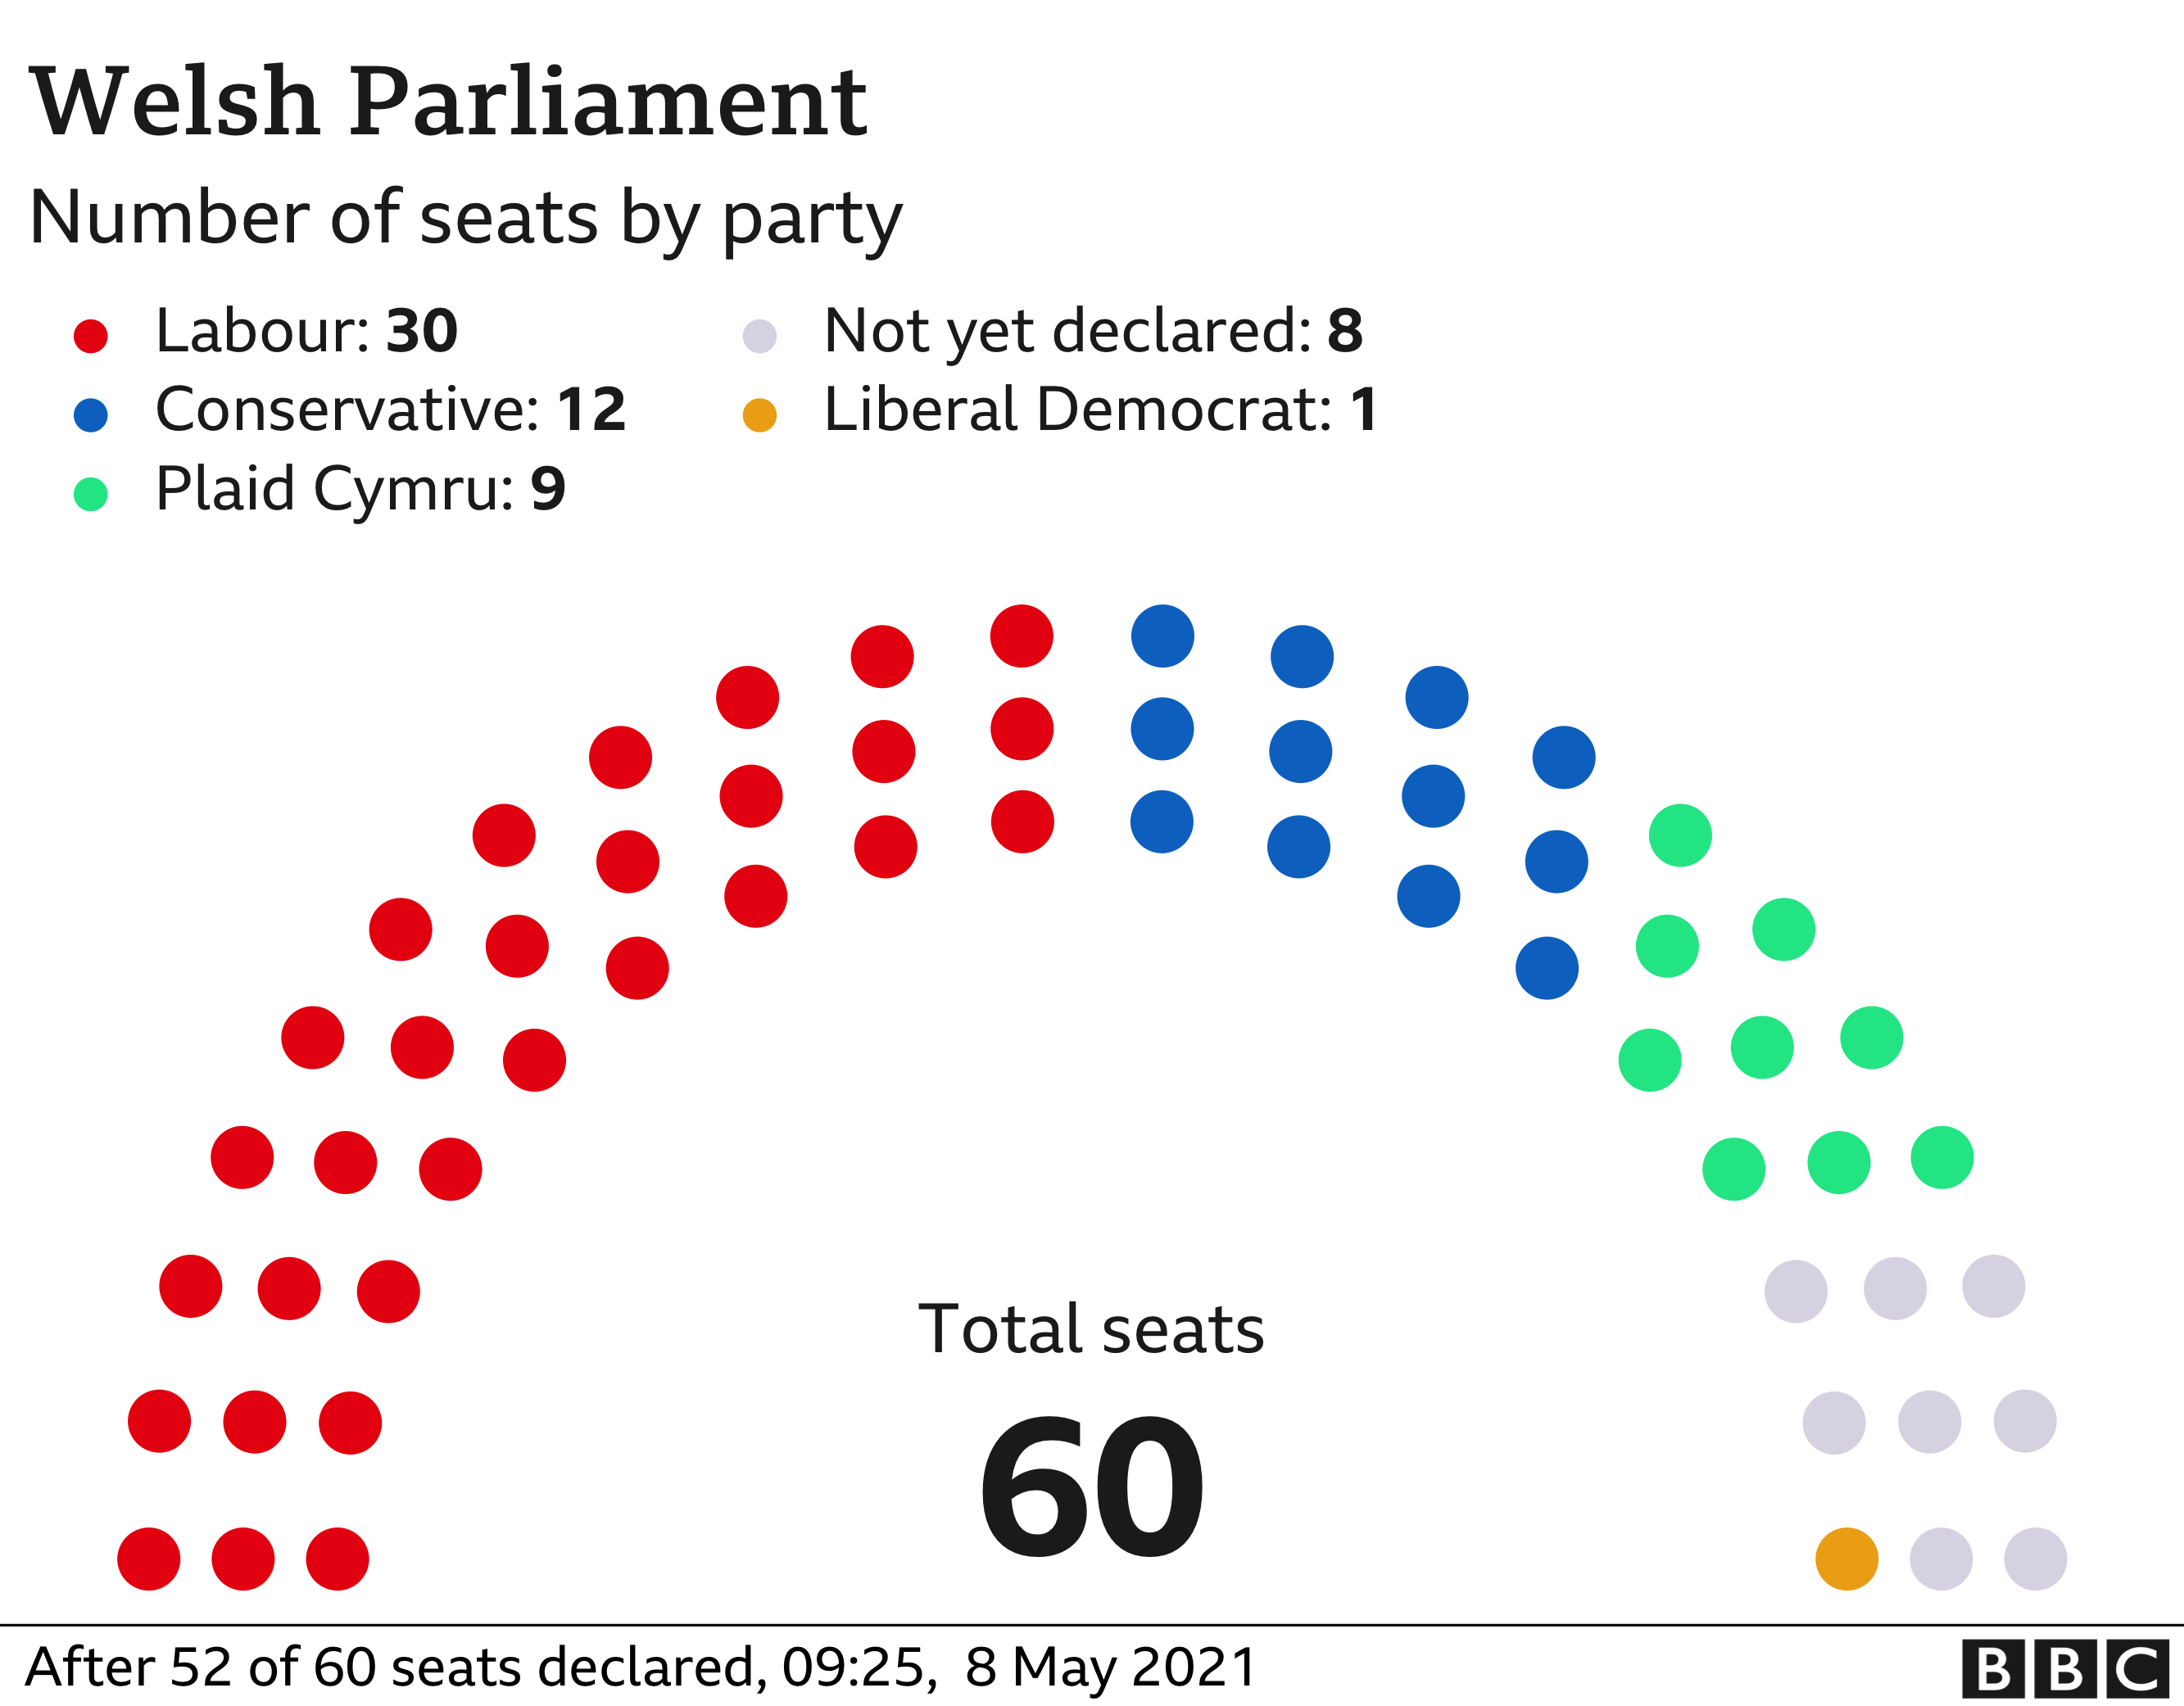 Graphic showing the number of seats won by each party in Wales